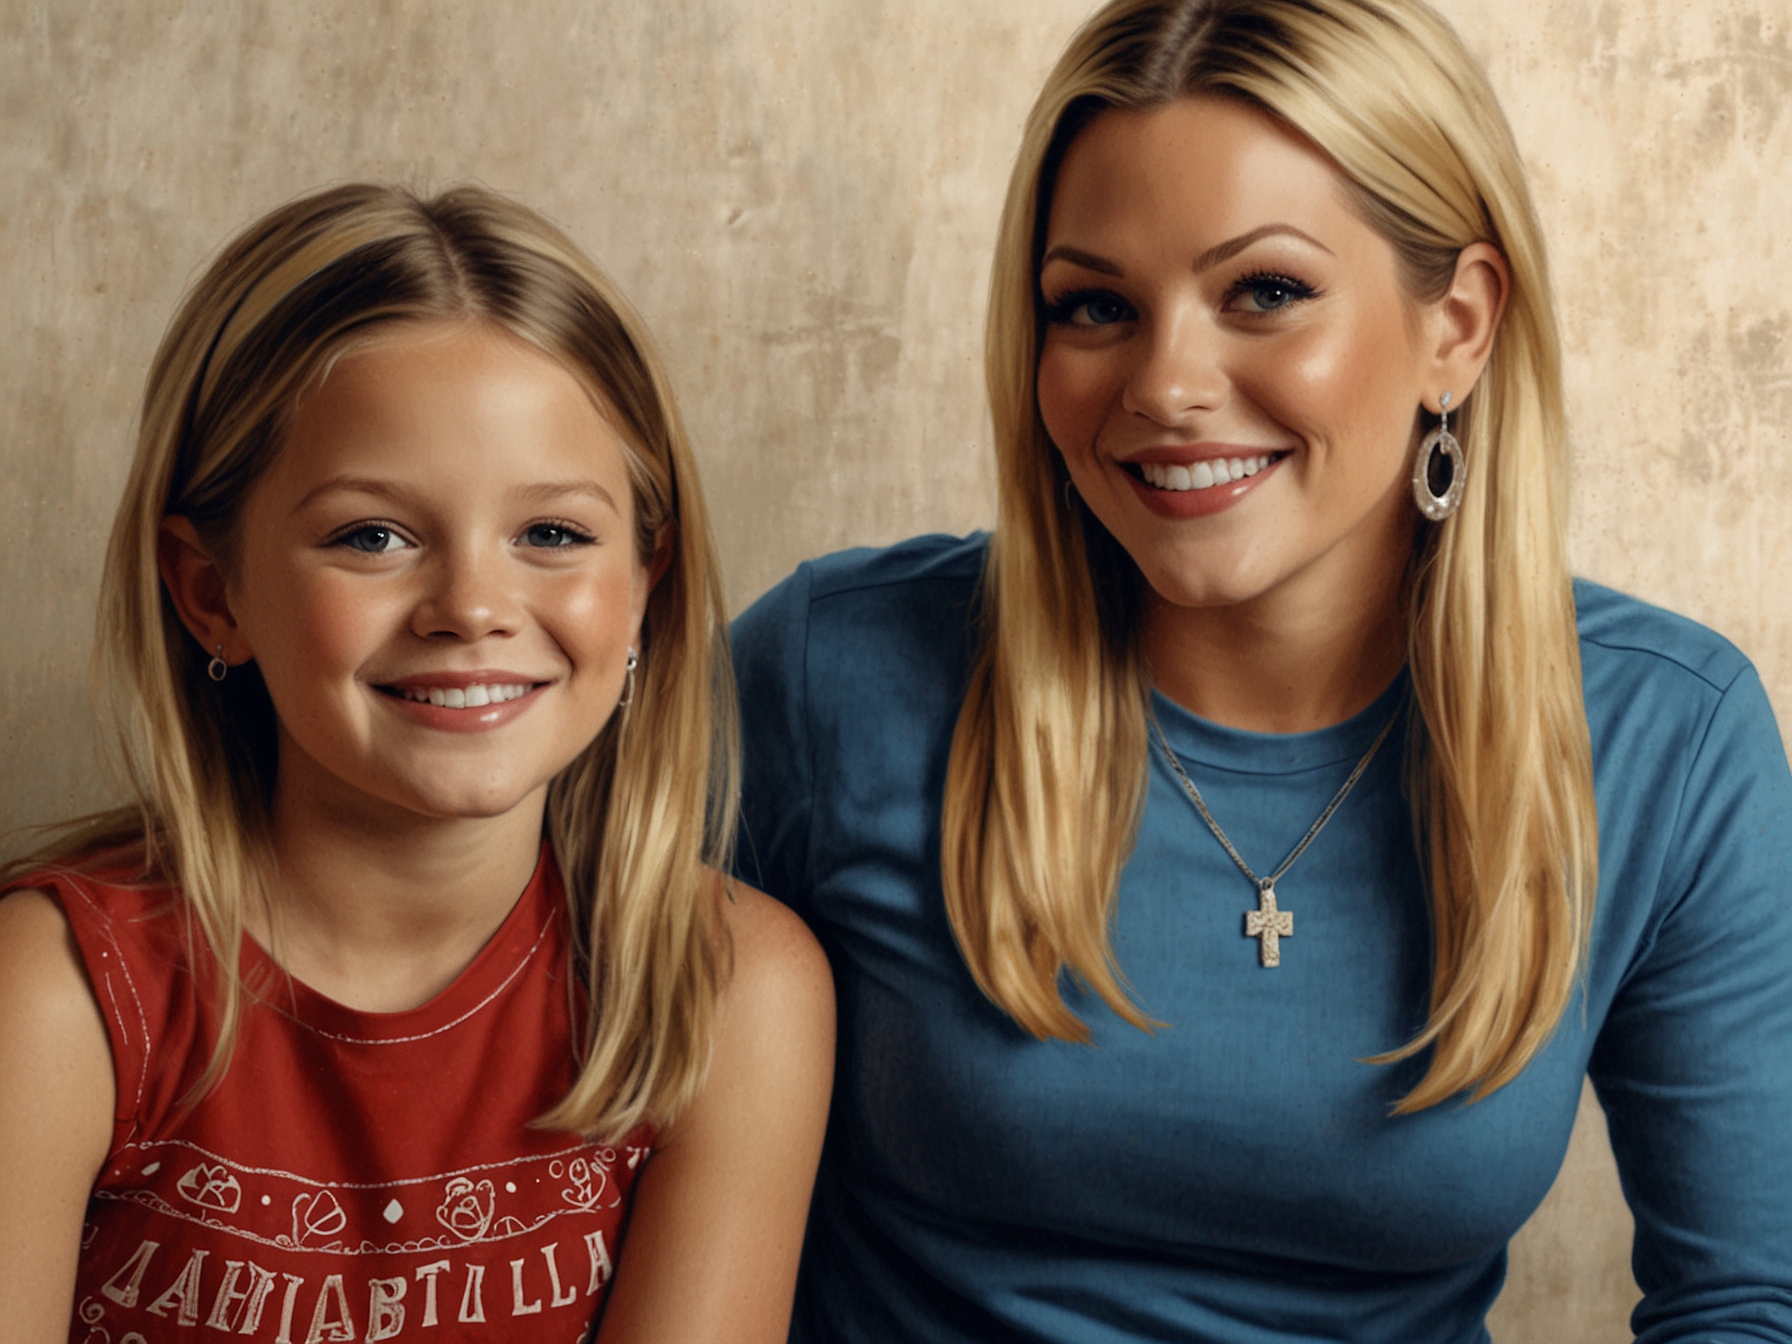 Shanna Moakler, smiling confidently, with her children Landon, Alabama, and Atiana, showcasing their strong family bond amidst public scrutiny and social media rumors.